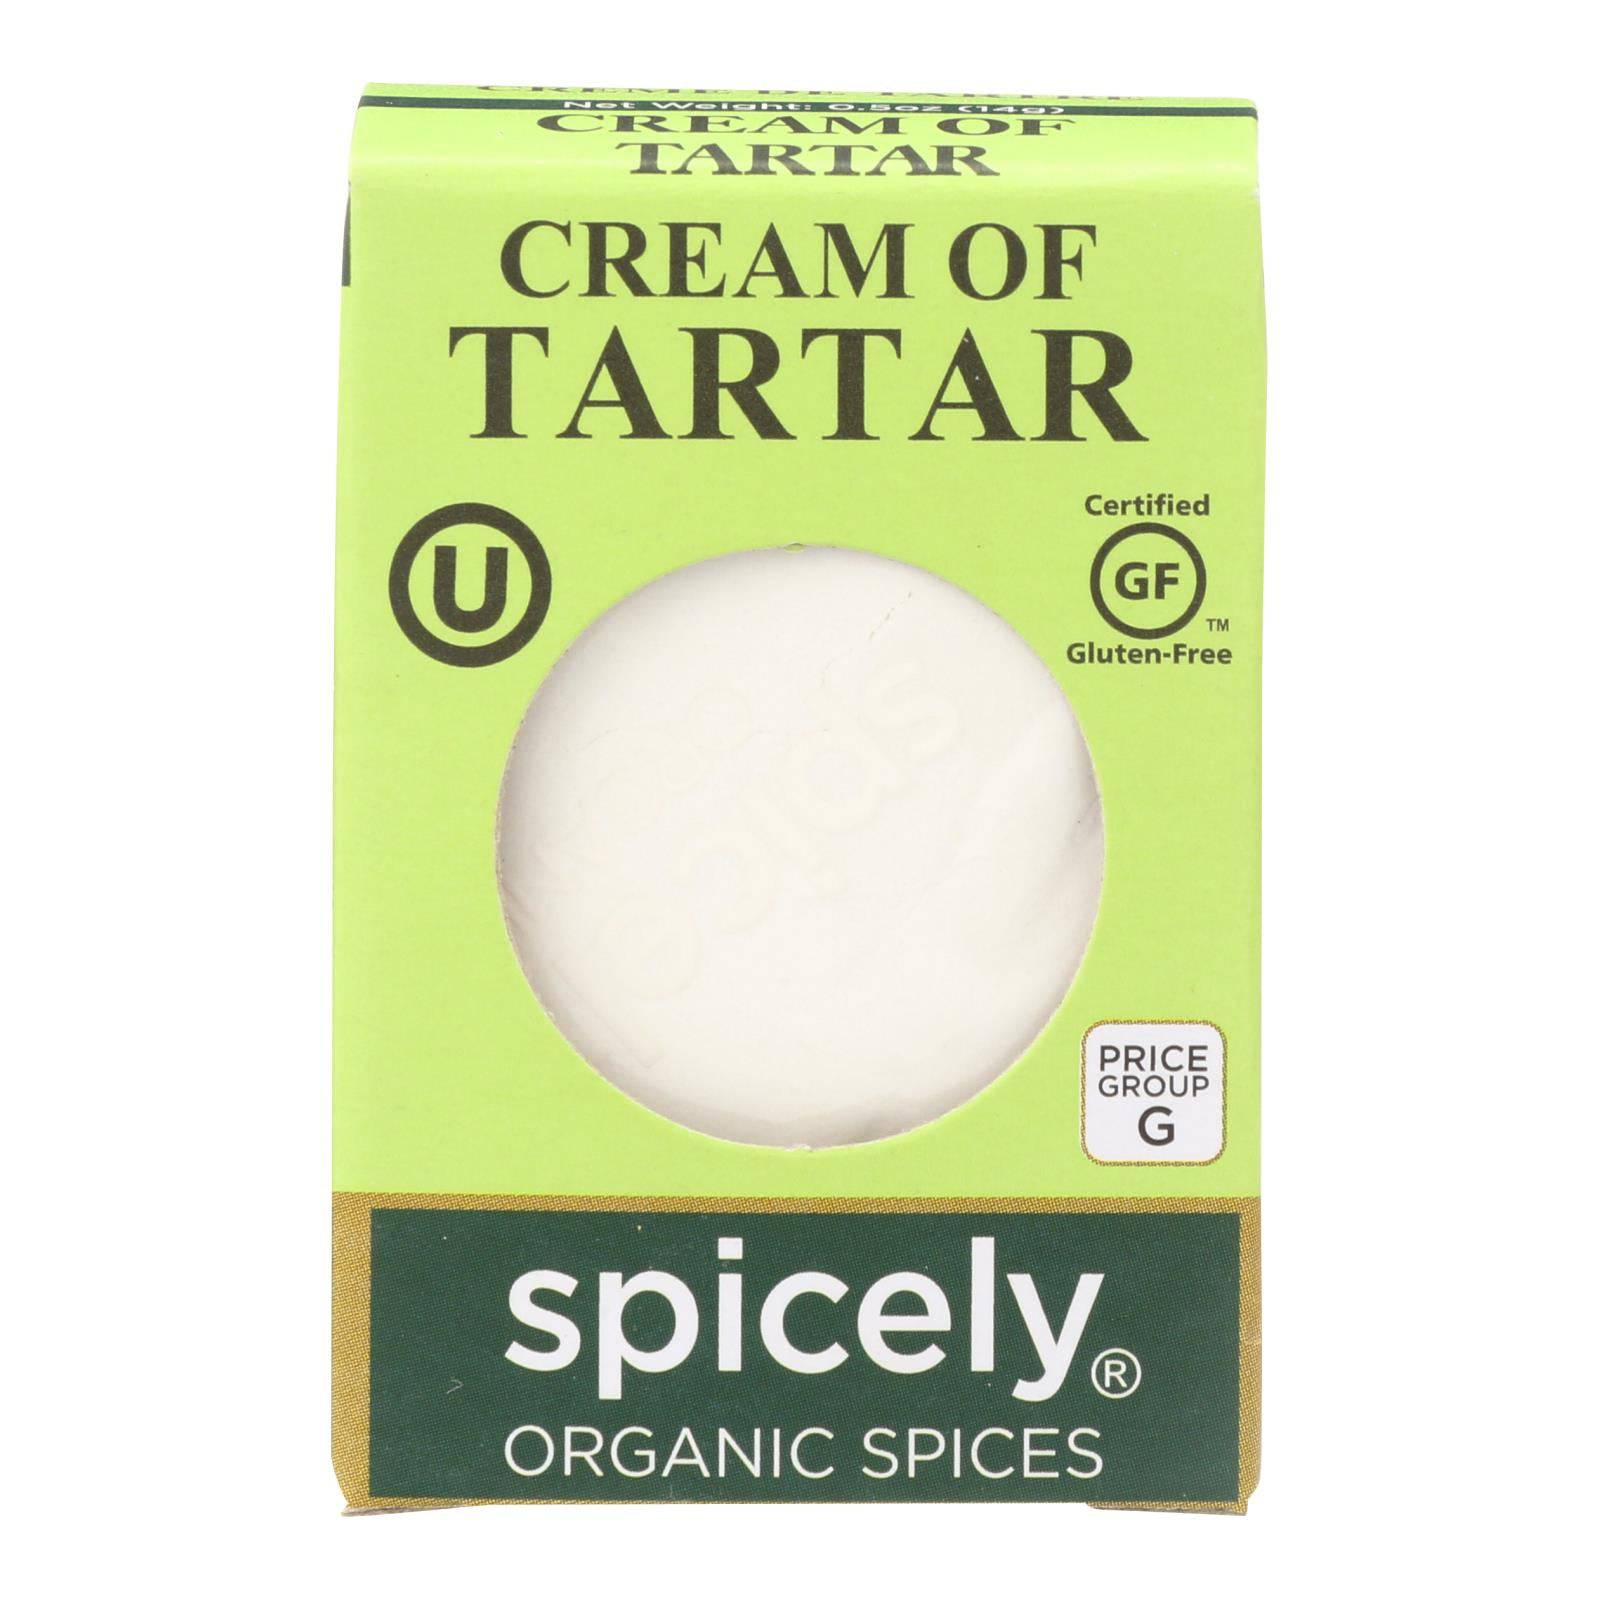 Spicely Organics - Cream Of Tartar - Case Of 6 - 0.5 Oz. | OnlyNaturals.us